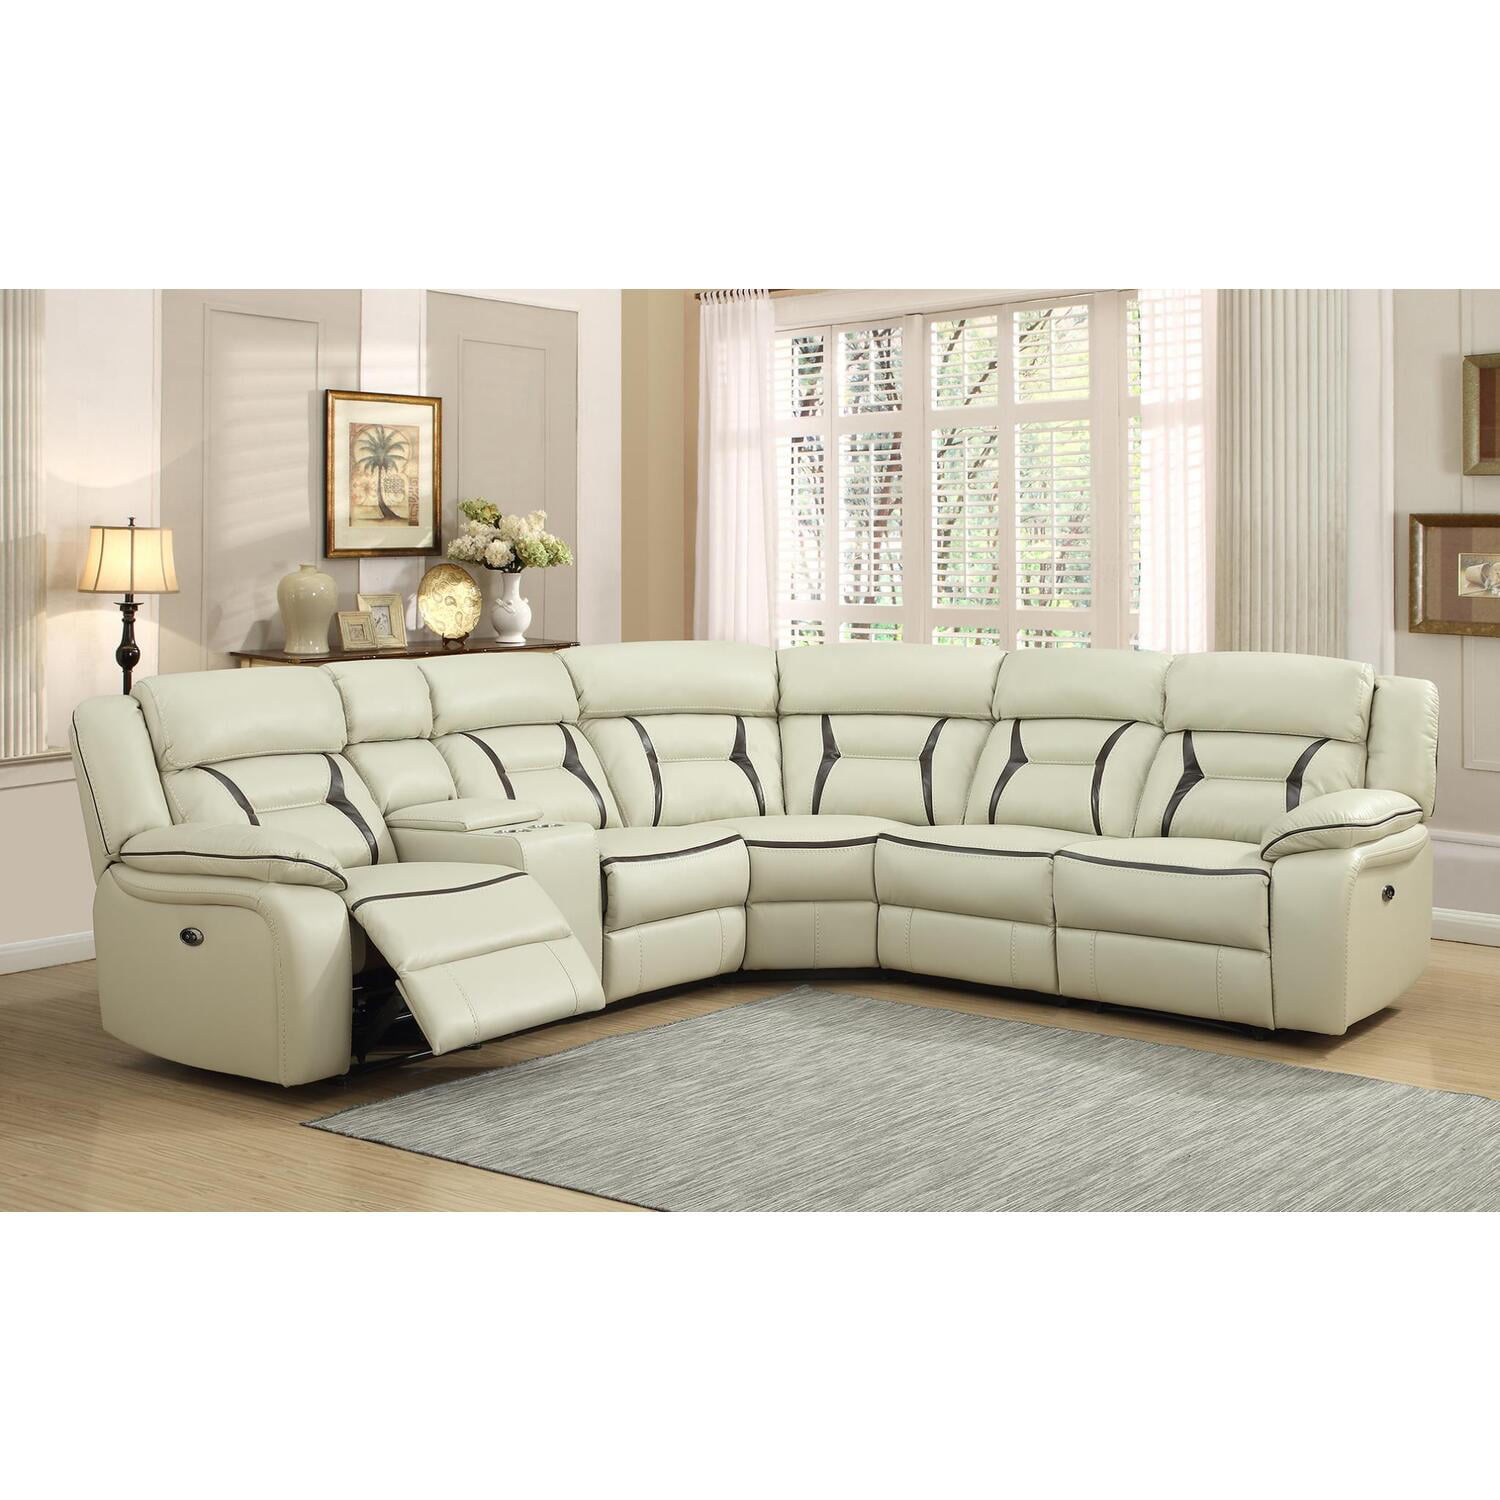 Myco Furniture Leo Recliner Leather Gel, Two Tone Leather Sectional